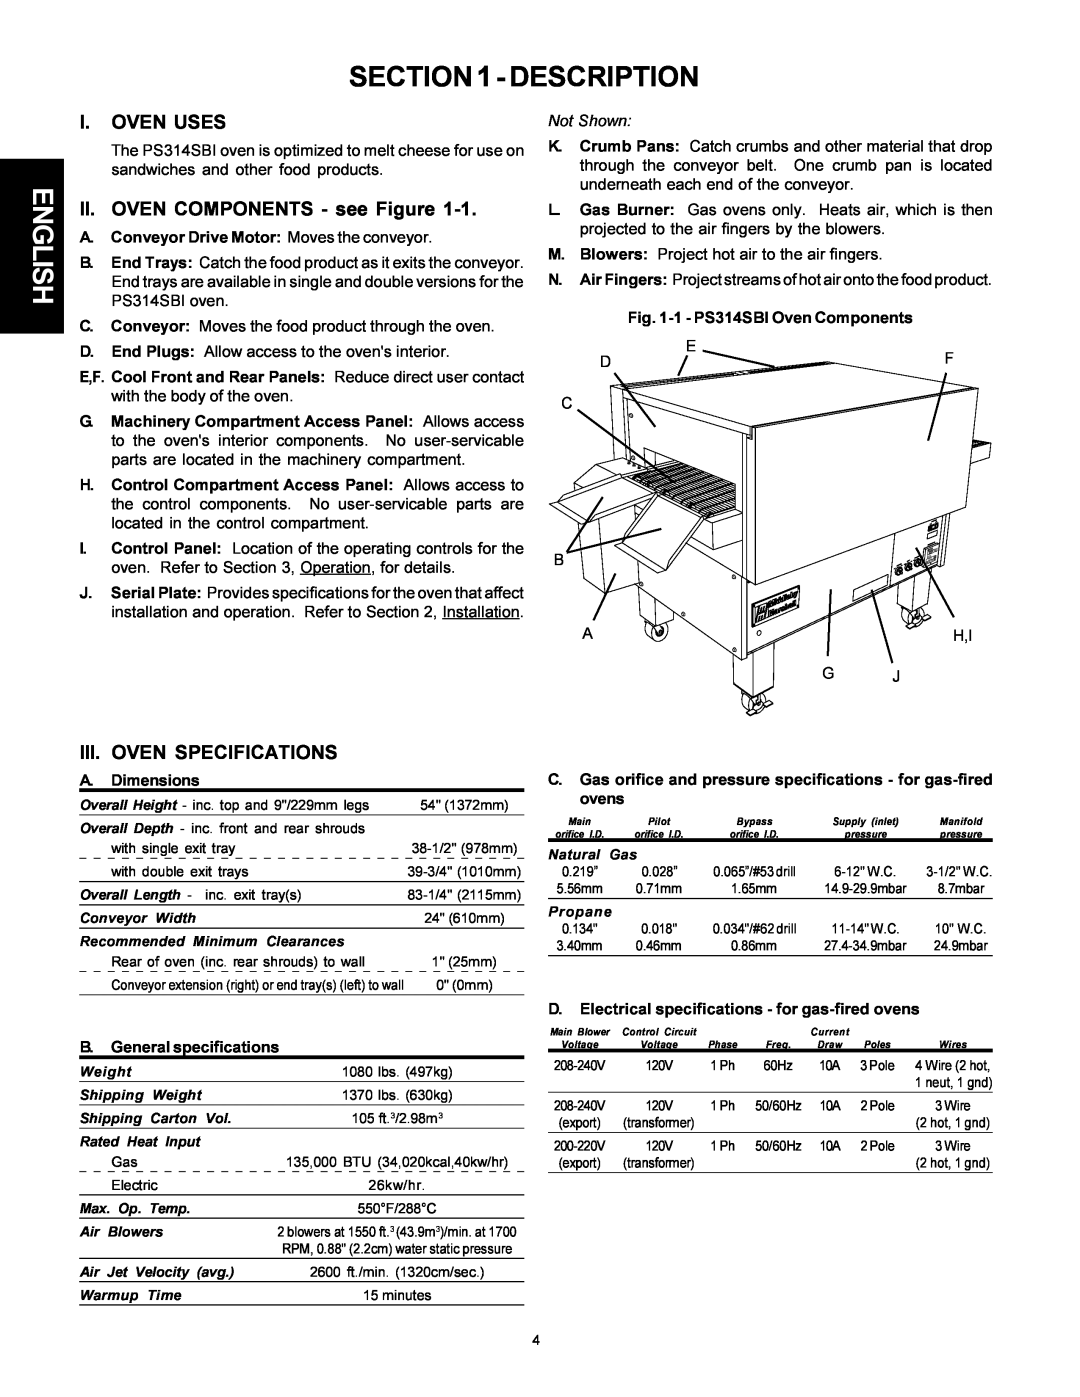 Middleby Marshall PS314SBI Description, English, I.Oven Uses, II. OVEN COMPONENTS - see Figure, Oven Specifications 